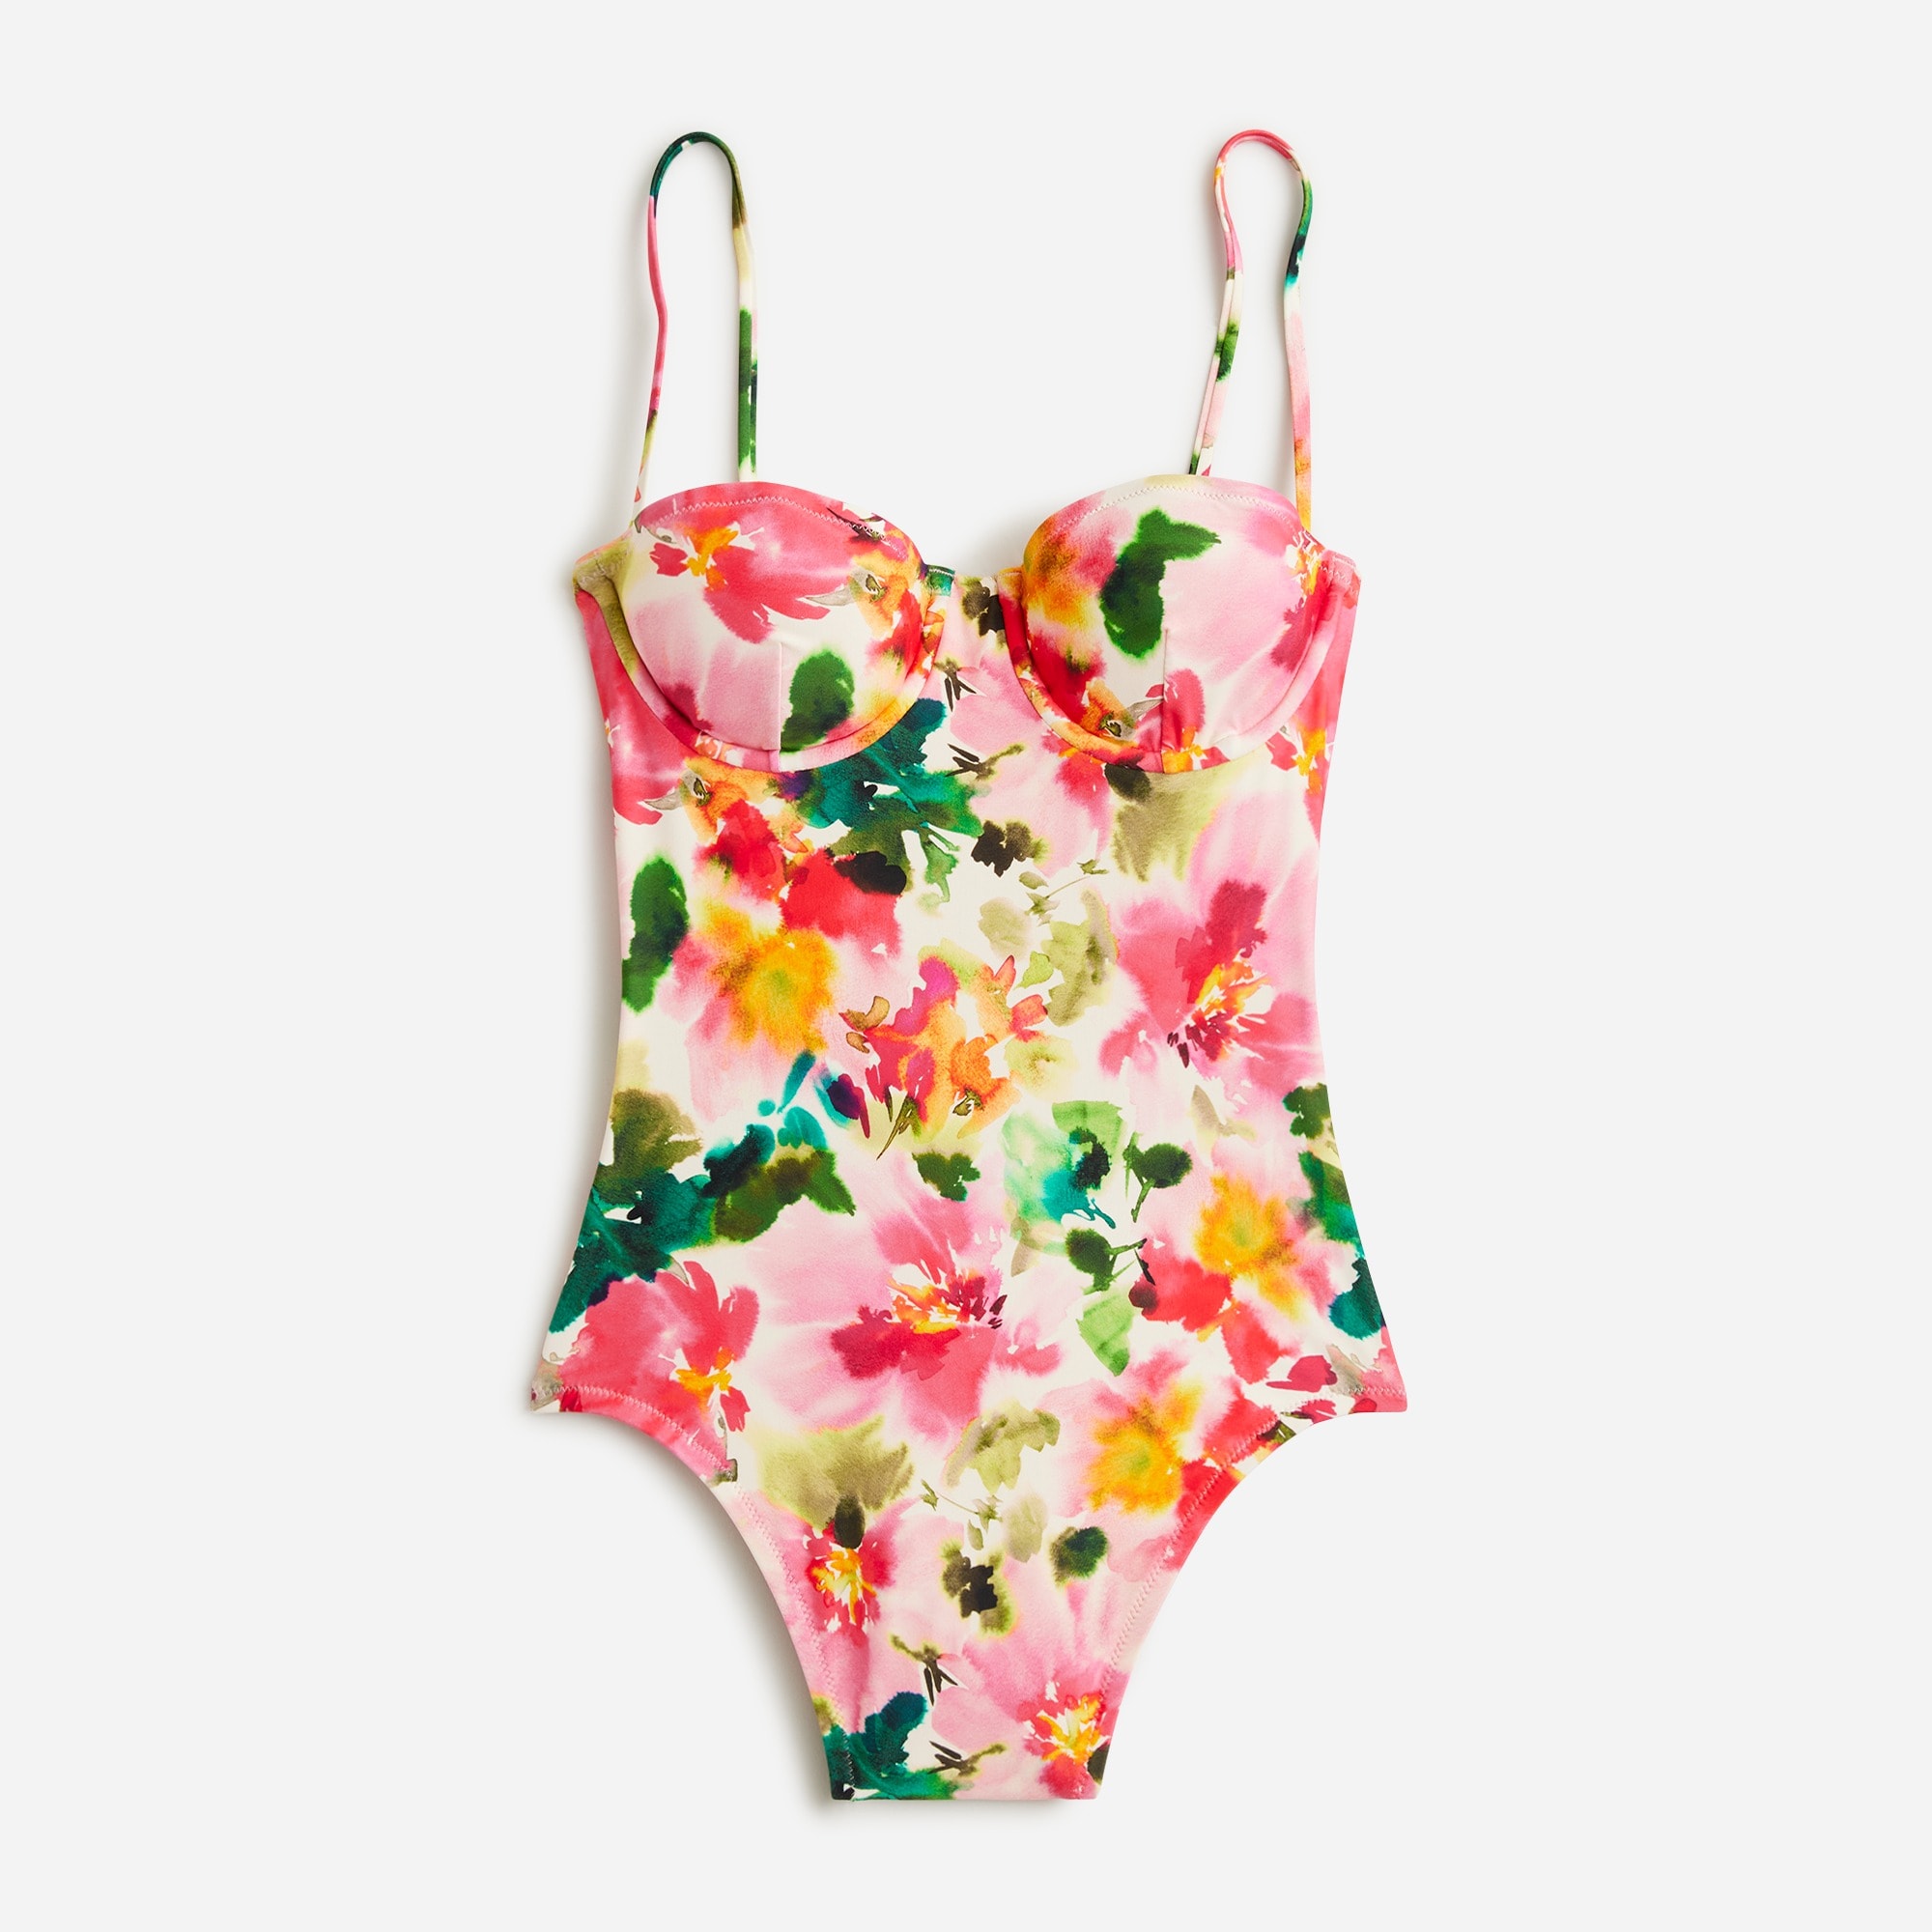  Balconette underwire one-piece swimsuit in floral